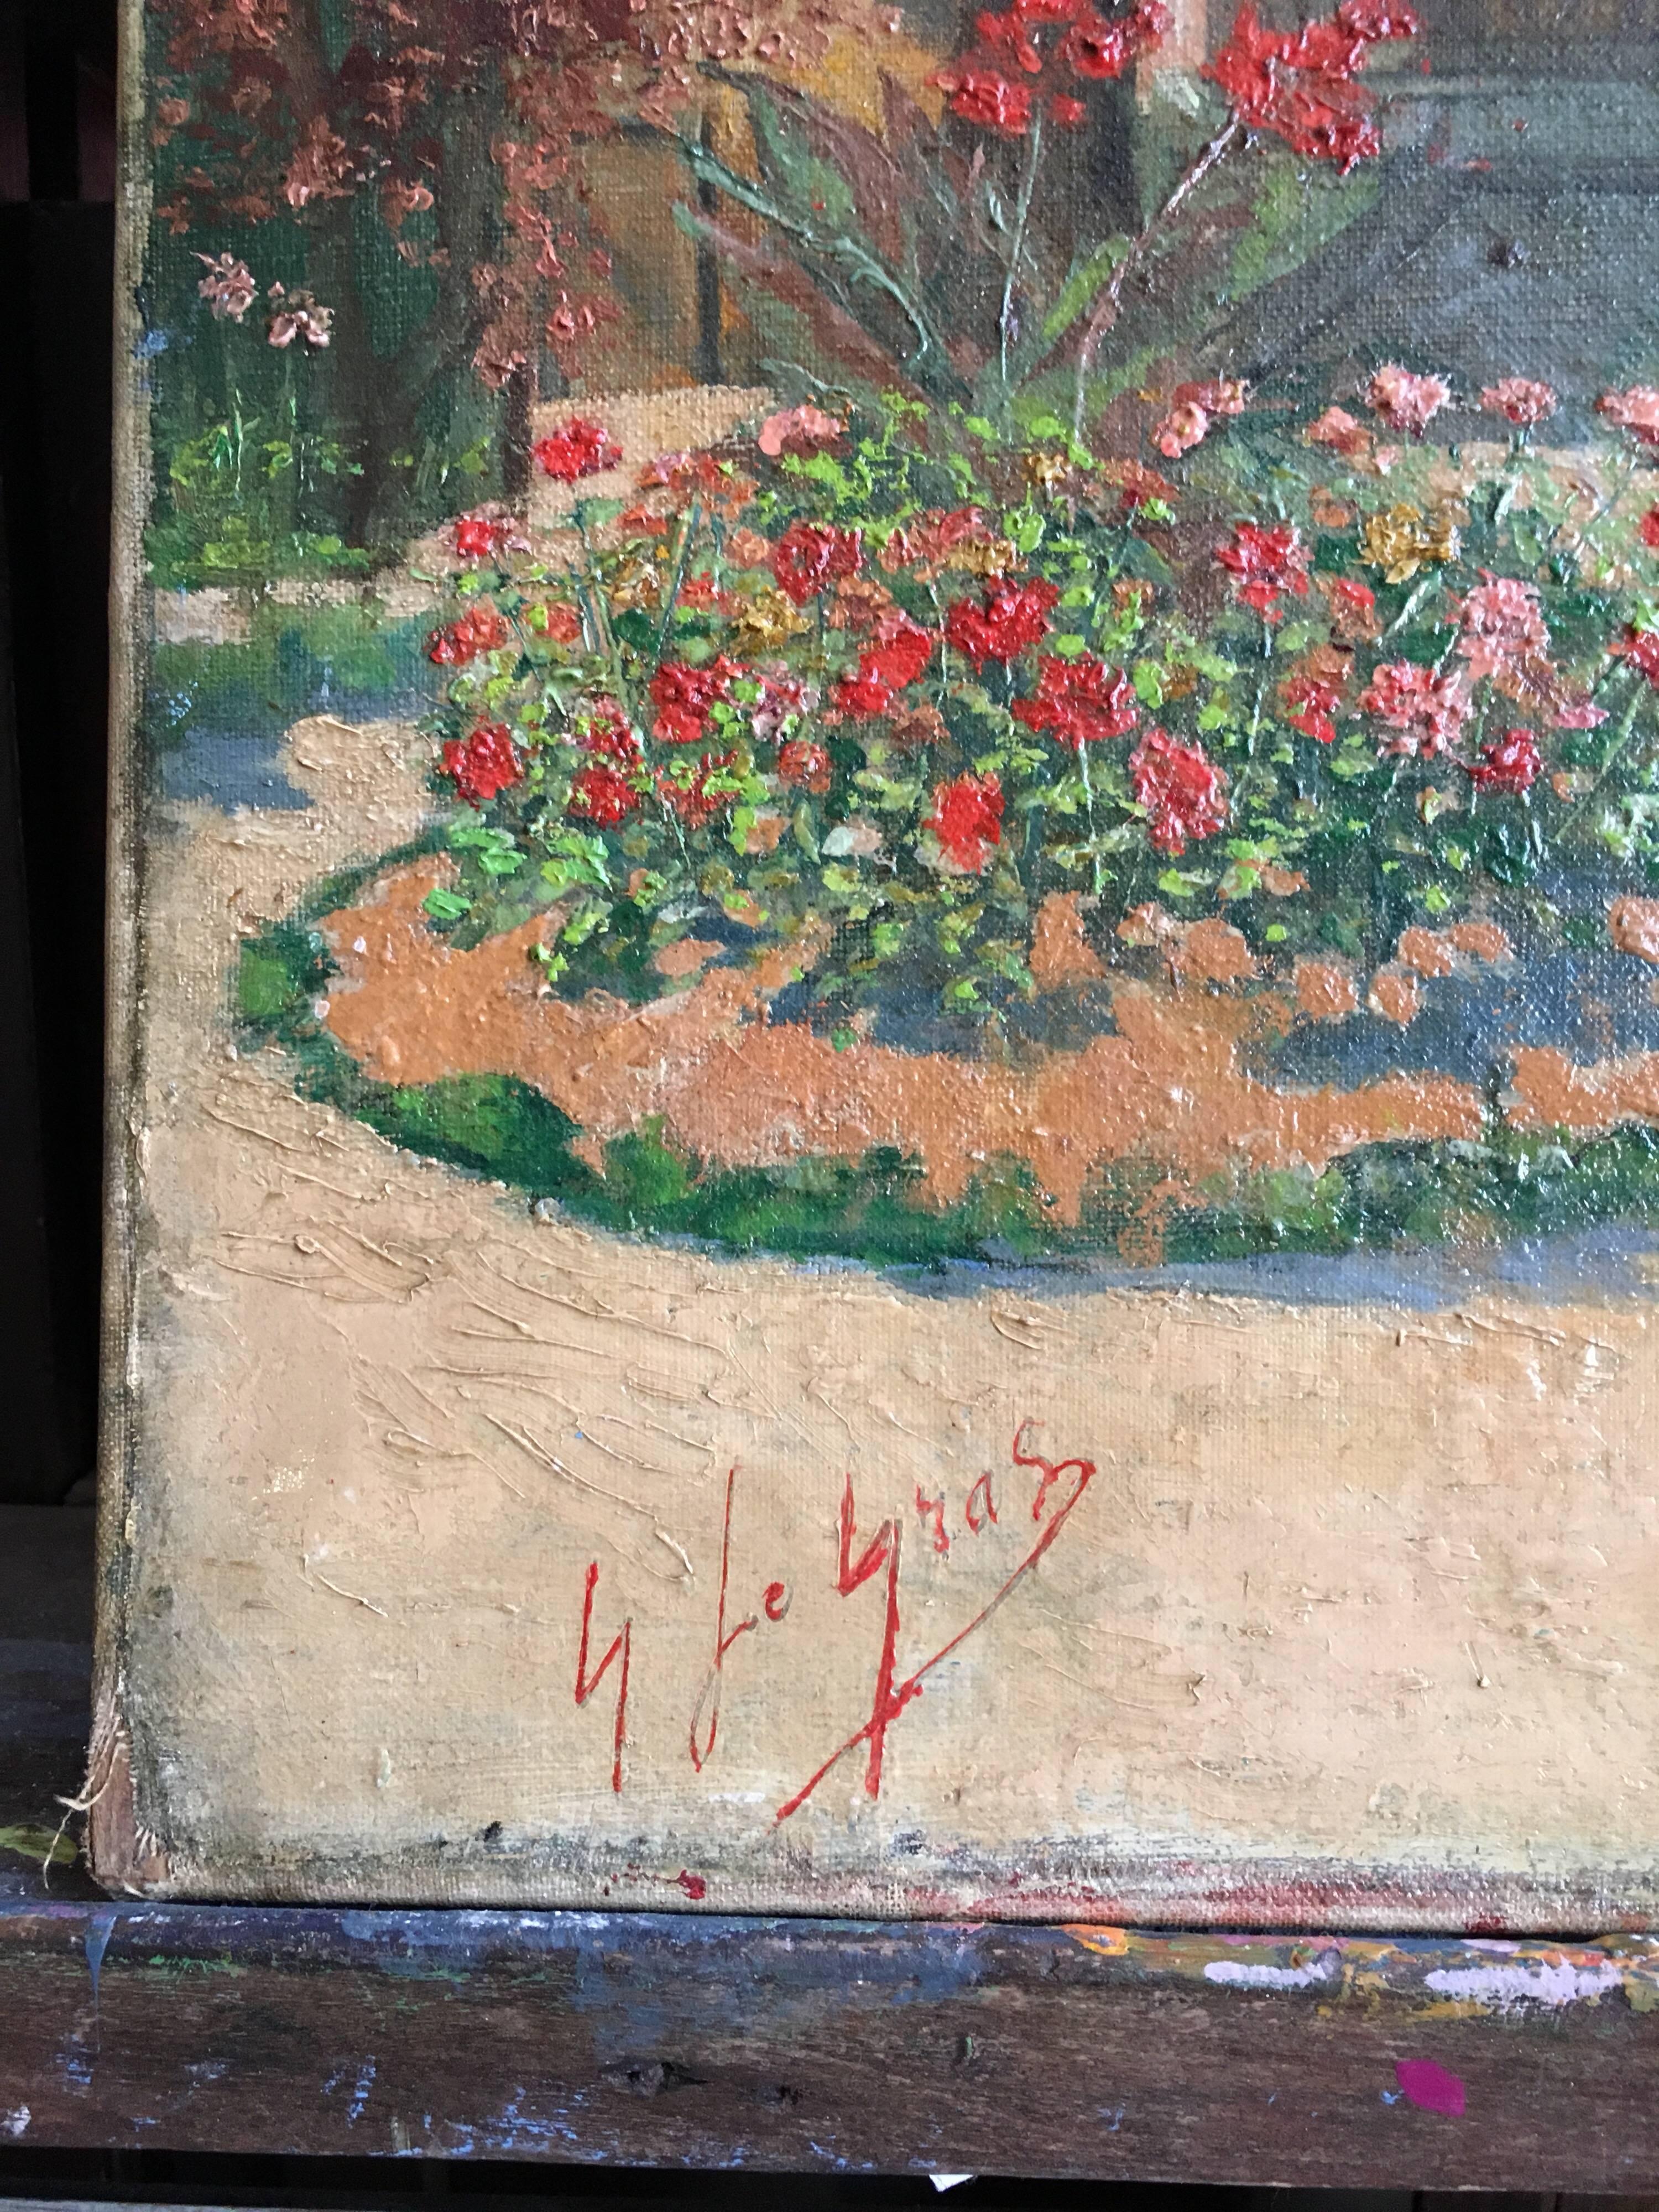 1930’s French Impressionist Oil Colourful Garden 
By Georges Le Gras, French artist, Early 20th Century
Signed by the artist on the left hand corner
Oil painting on canvas, unframed
Canvas size: 15 x 18 inches

This vibrant exterior painting of a